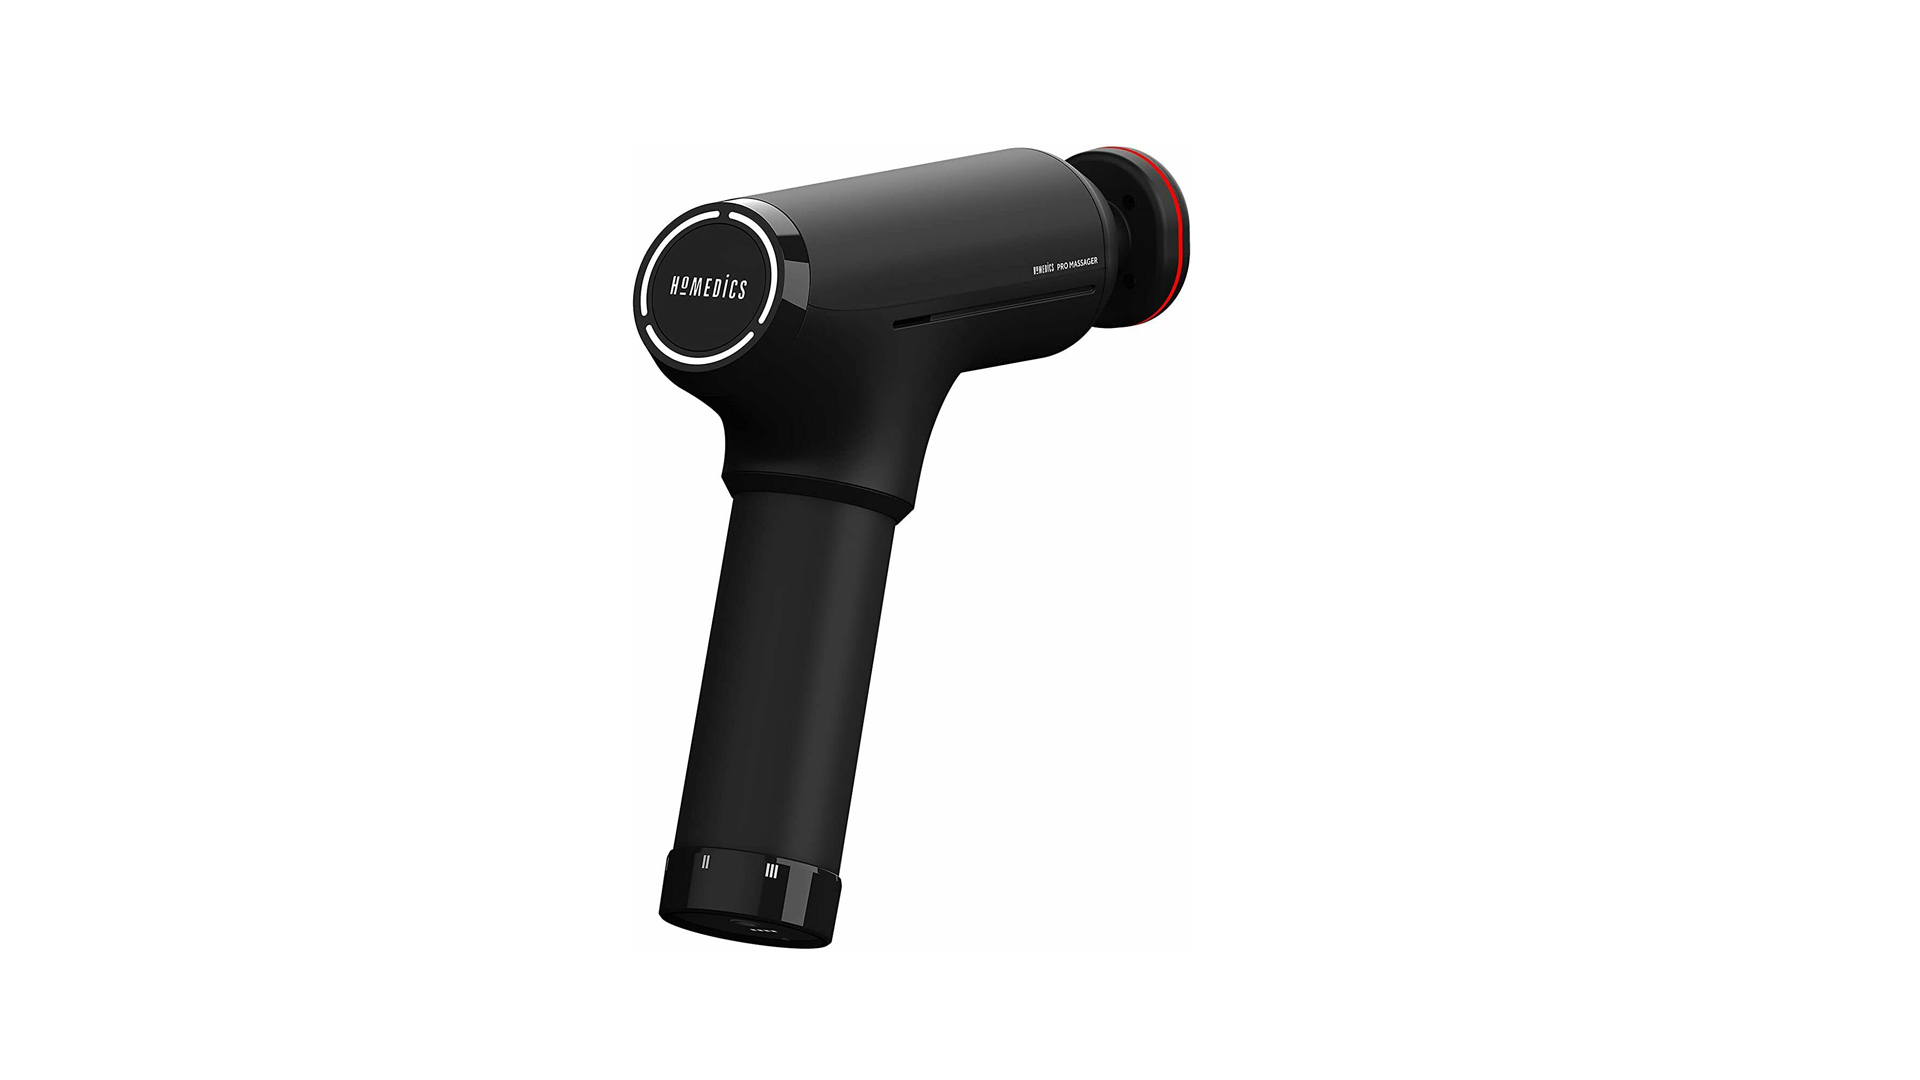 Hot Tools Professional Ionic Hair Dryer Only 2699 on Targetcom  Regularly 50